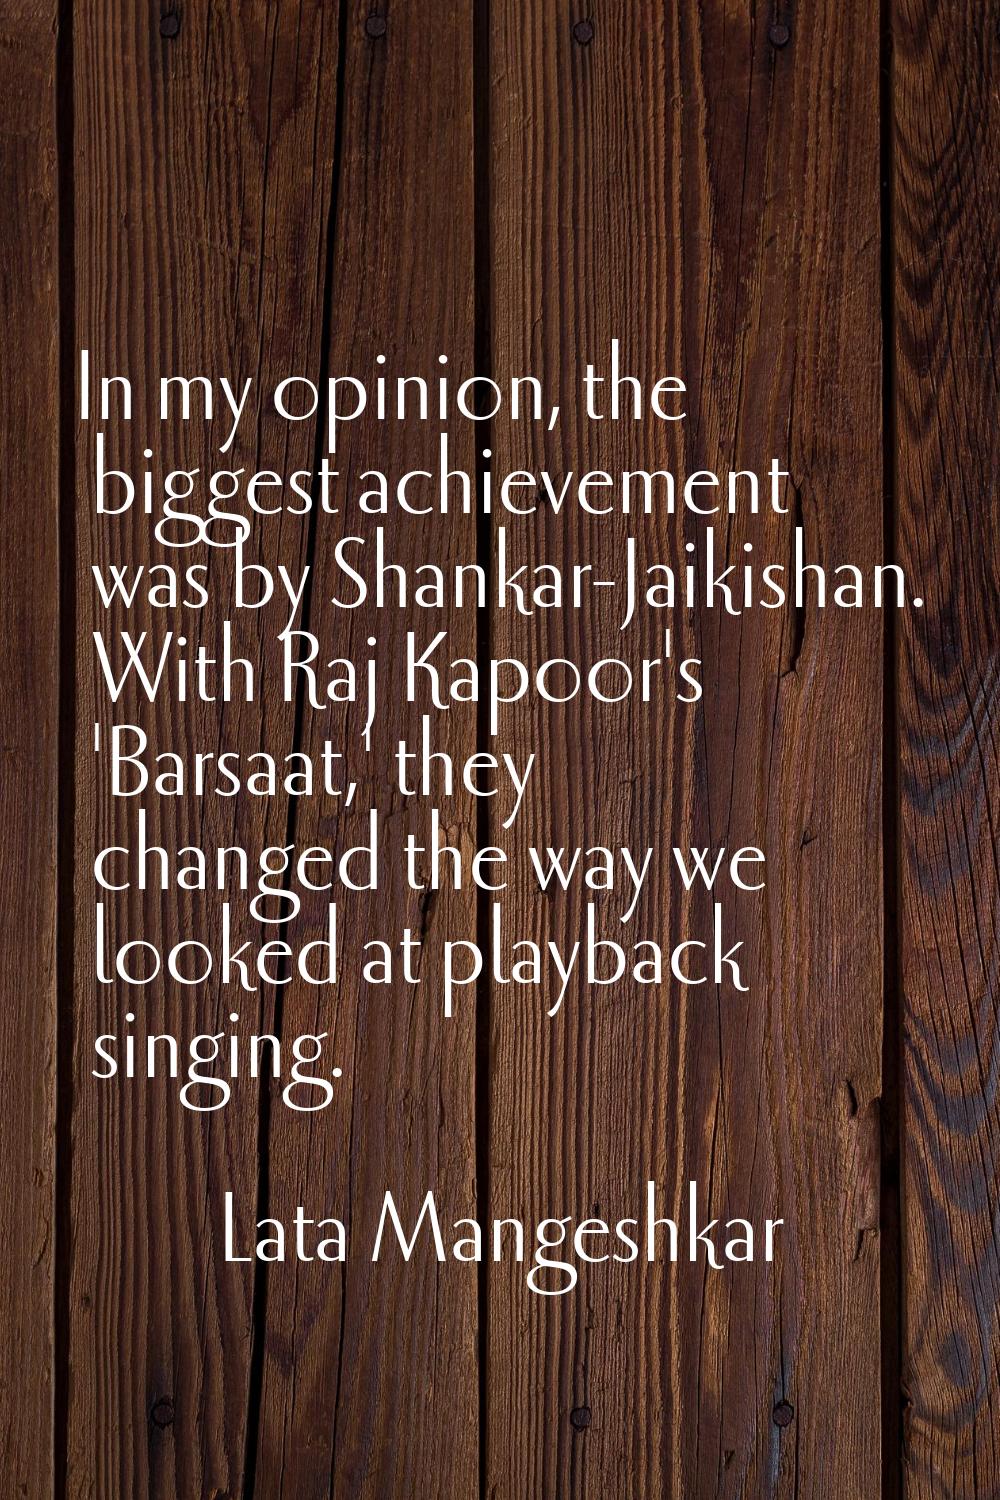 In my opinion, the biggest achievement was by Shankar-Jaikishan. With Raj Kapoor's 'Barsaat,' they 